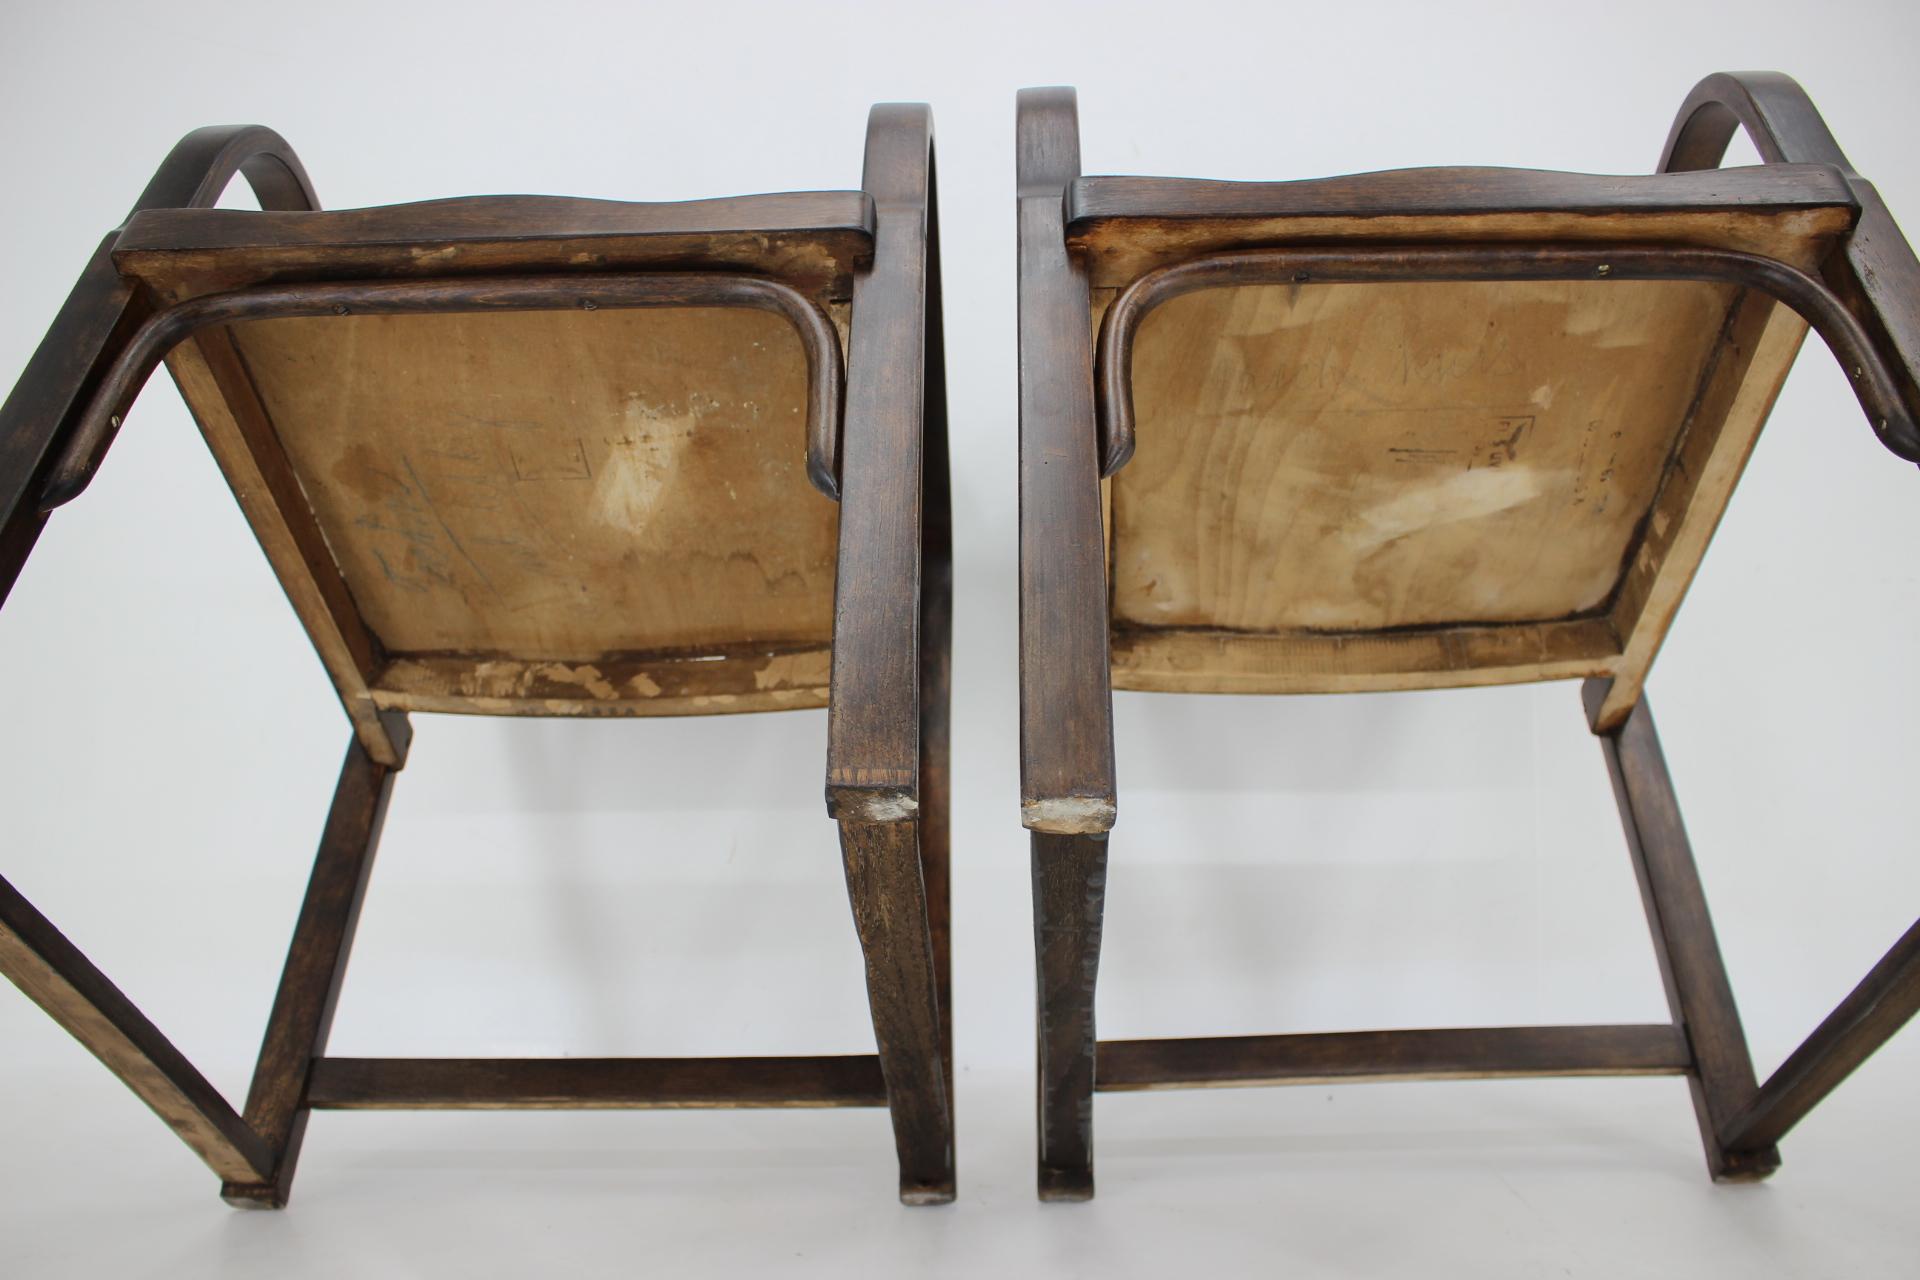 1930s Pair of Thonet Bentwood Armchairs A745 by Tatra, Czechoslovakia For Sale 5